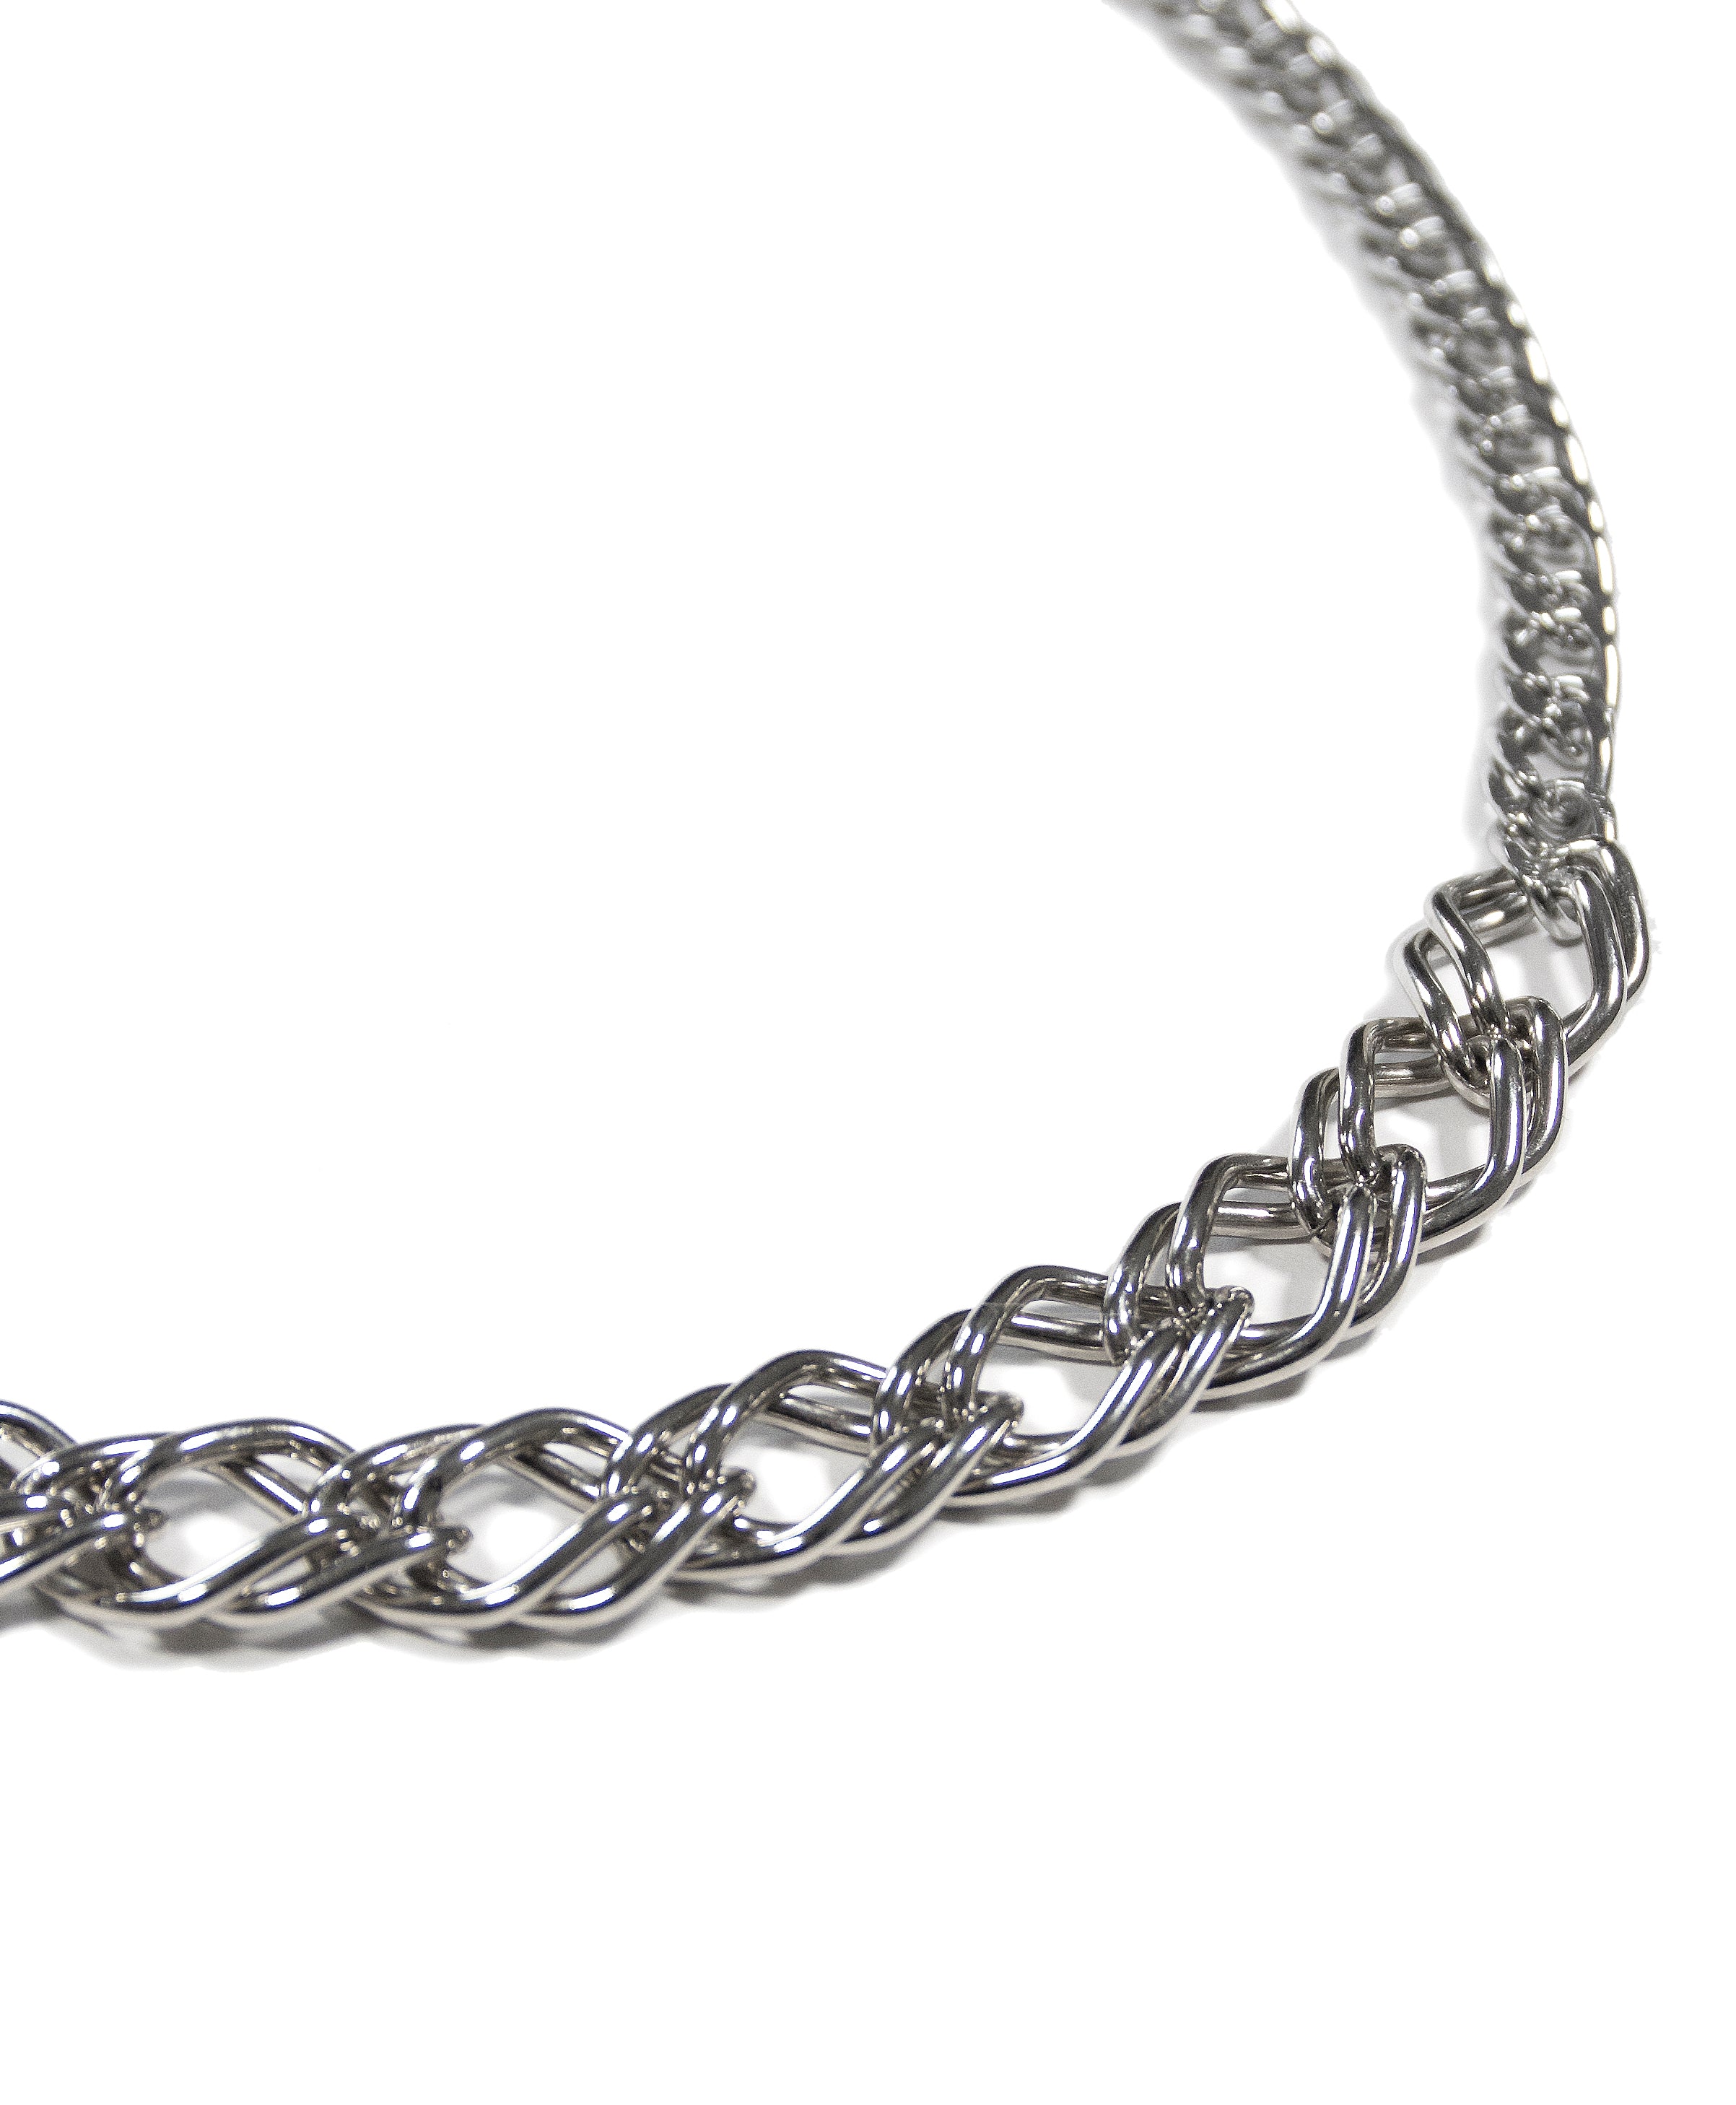 llayers-mens-women-jewelry-silver-stainlesssteel-choker-chain-necklace-unchained-007-Brooklyn-New-York-2